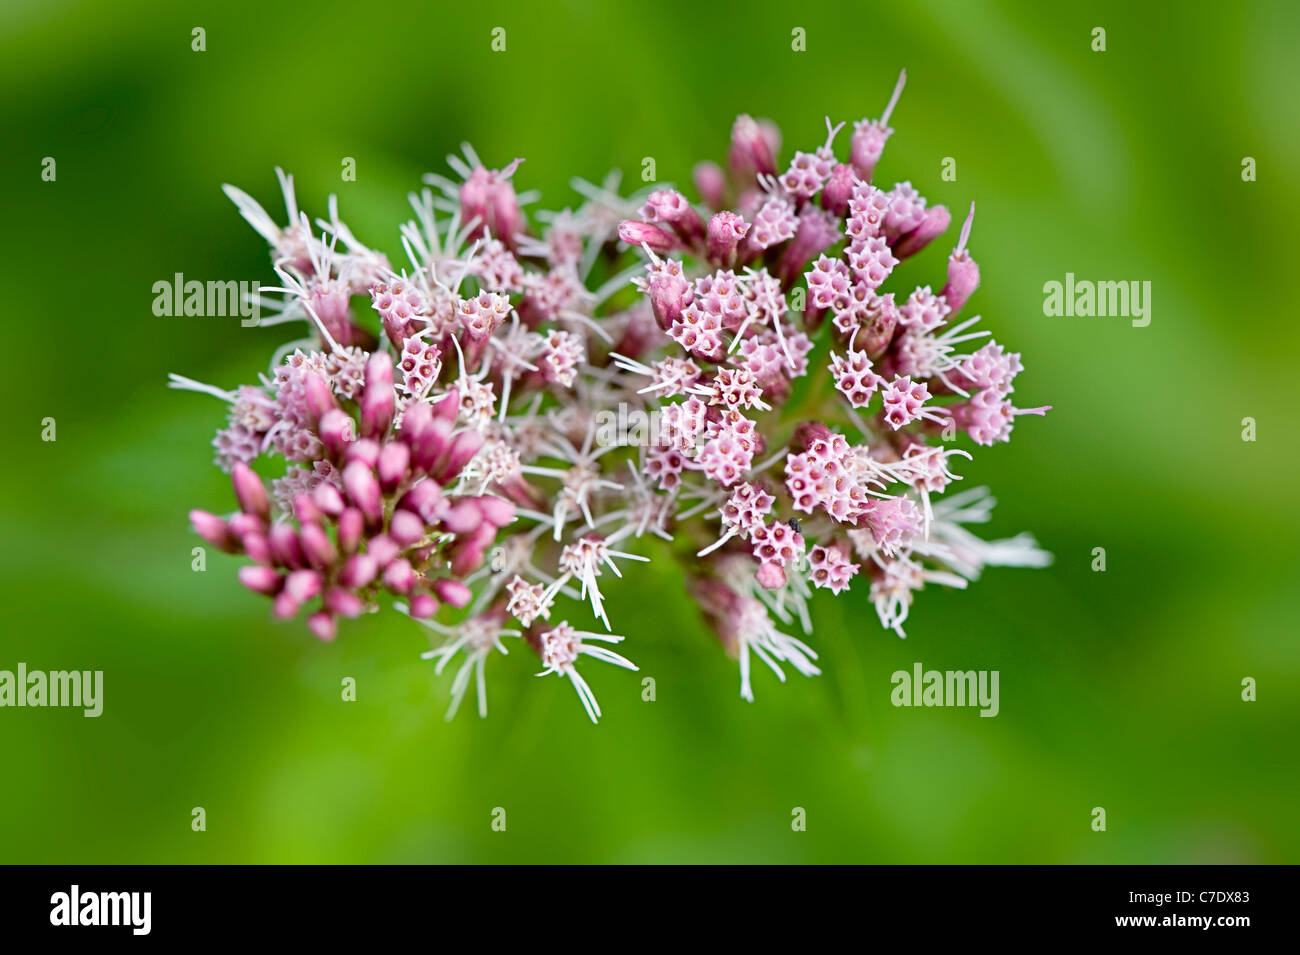 Close-up, macro image of the delicate pink flowers of Eupatorium cannabinum commonly known as Hemp Agrimony or holy rope. Stock Photo